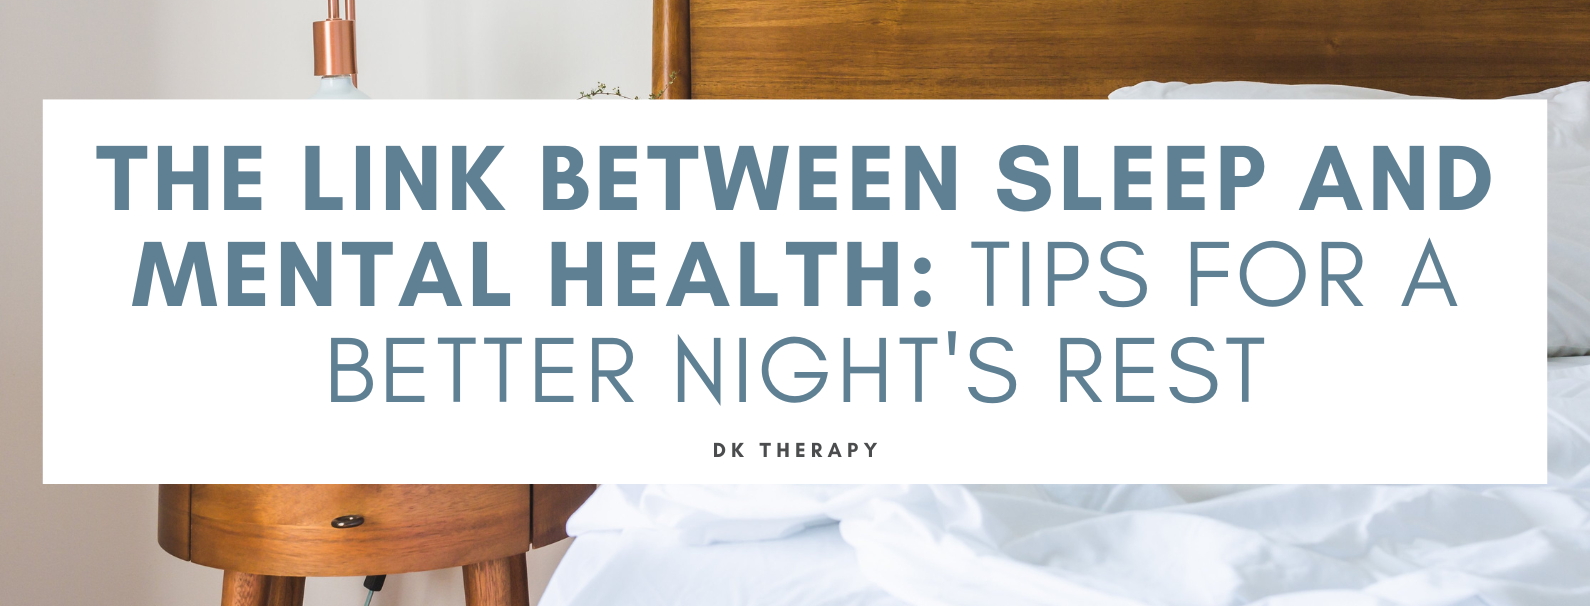 The Link Between Sleep and Mental Health_ Tips for a Better Night's Rest